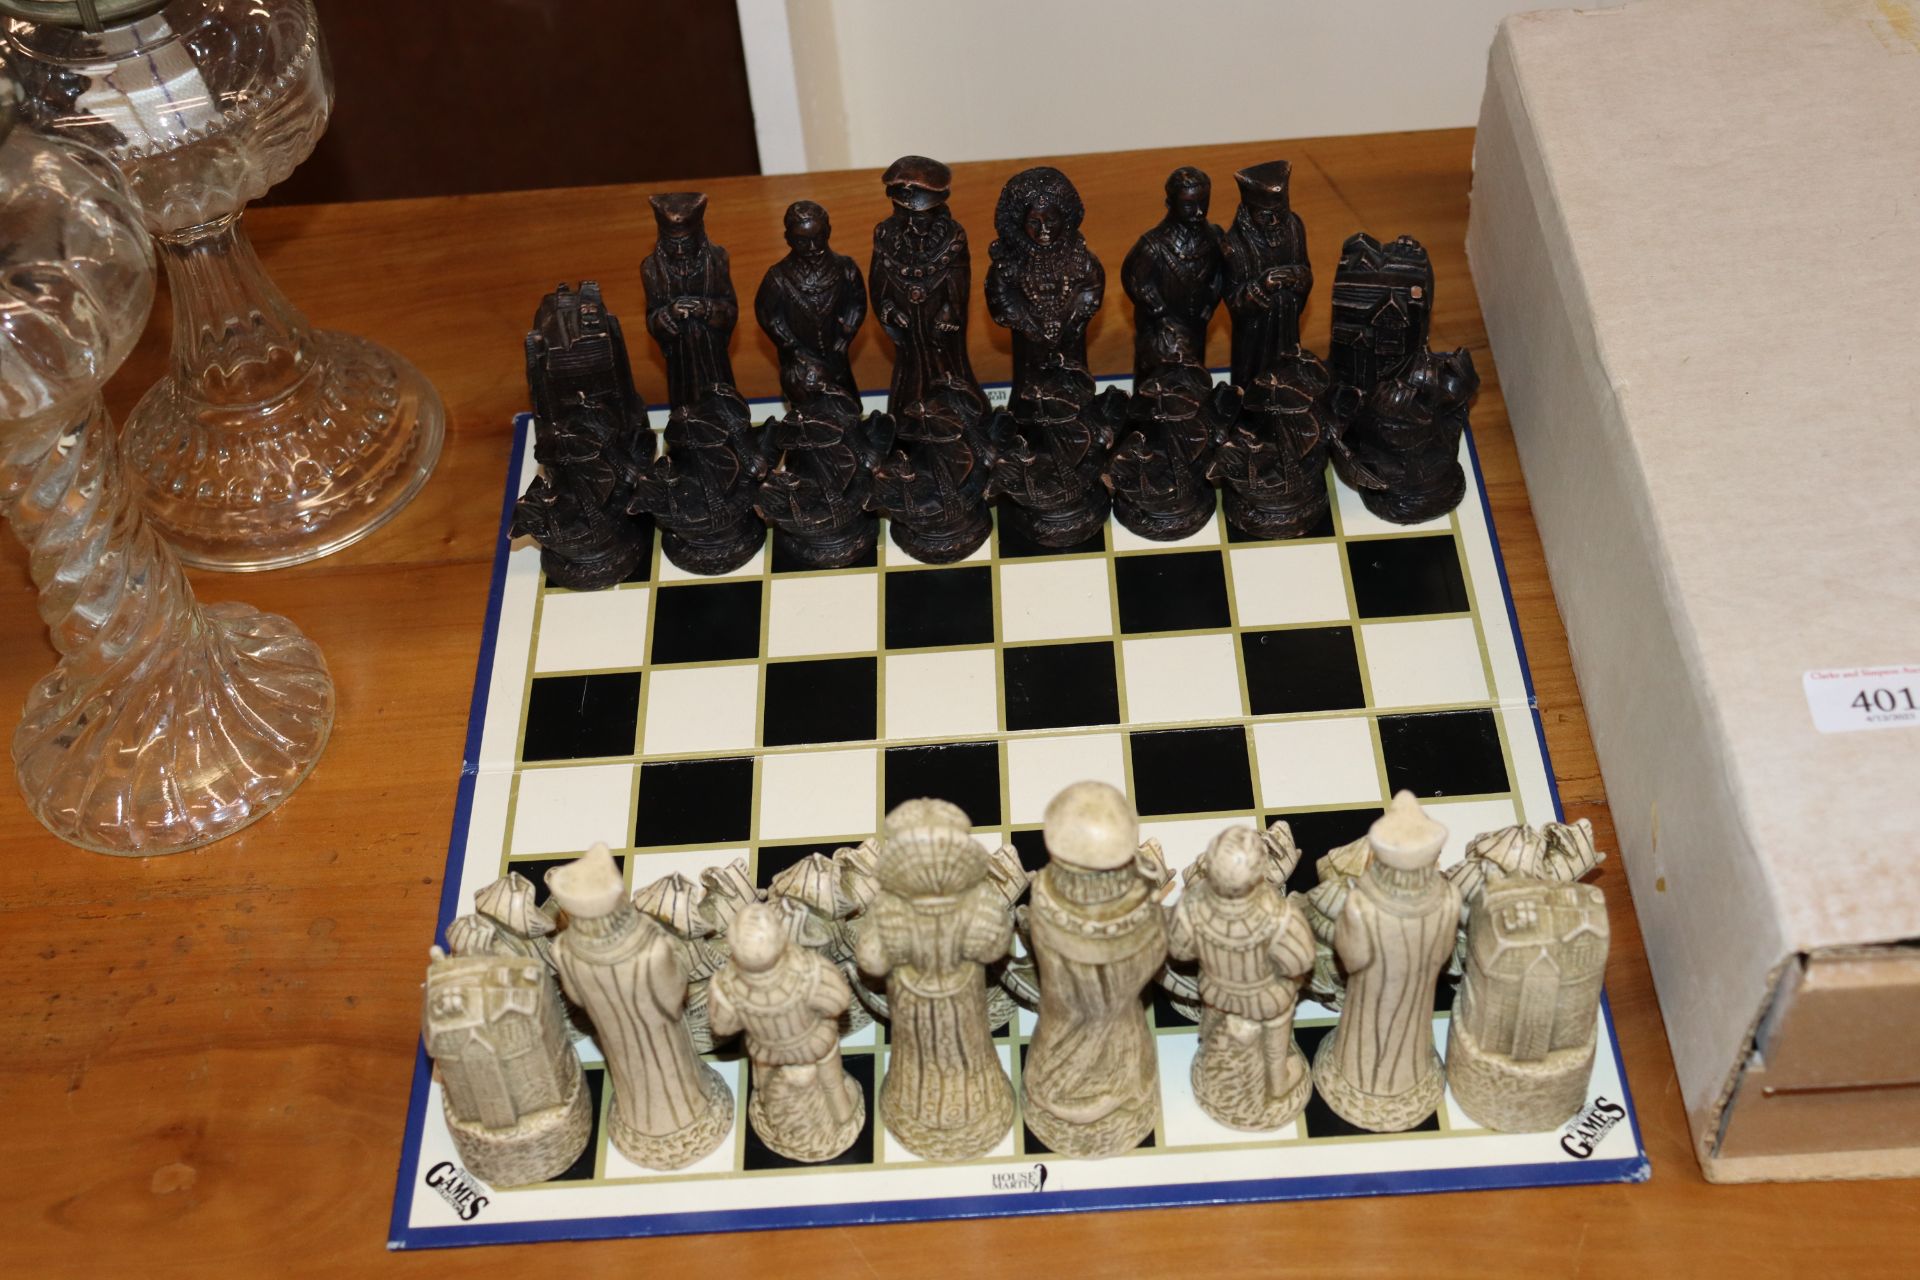 A Housemartin chess board and pieces